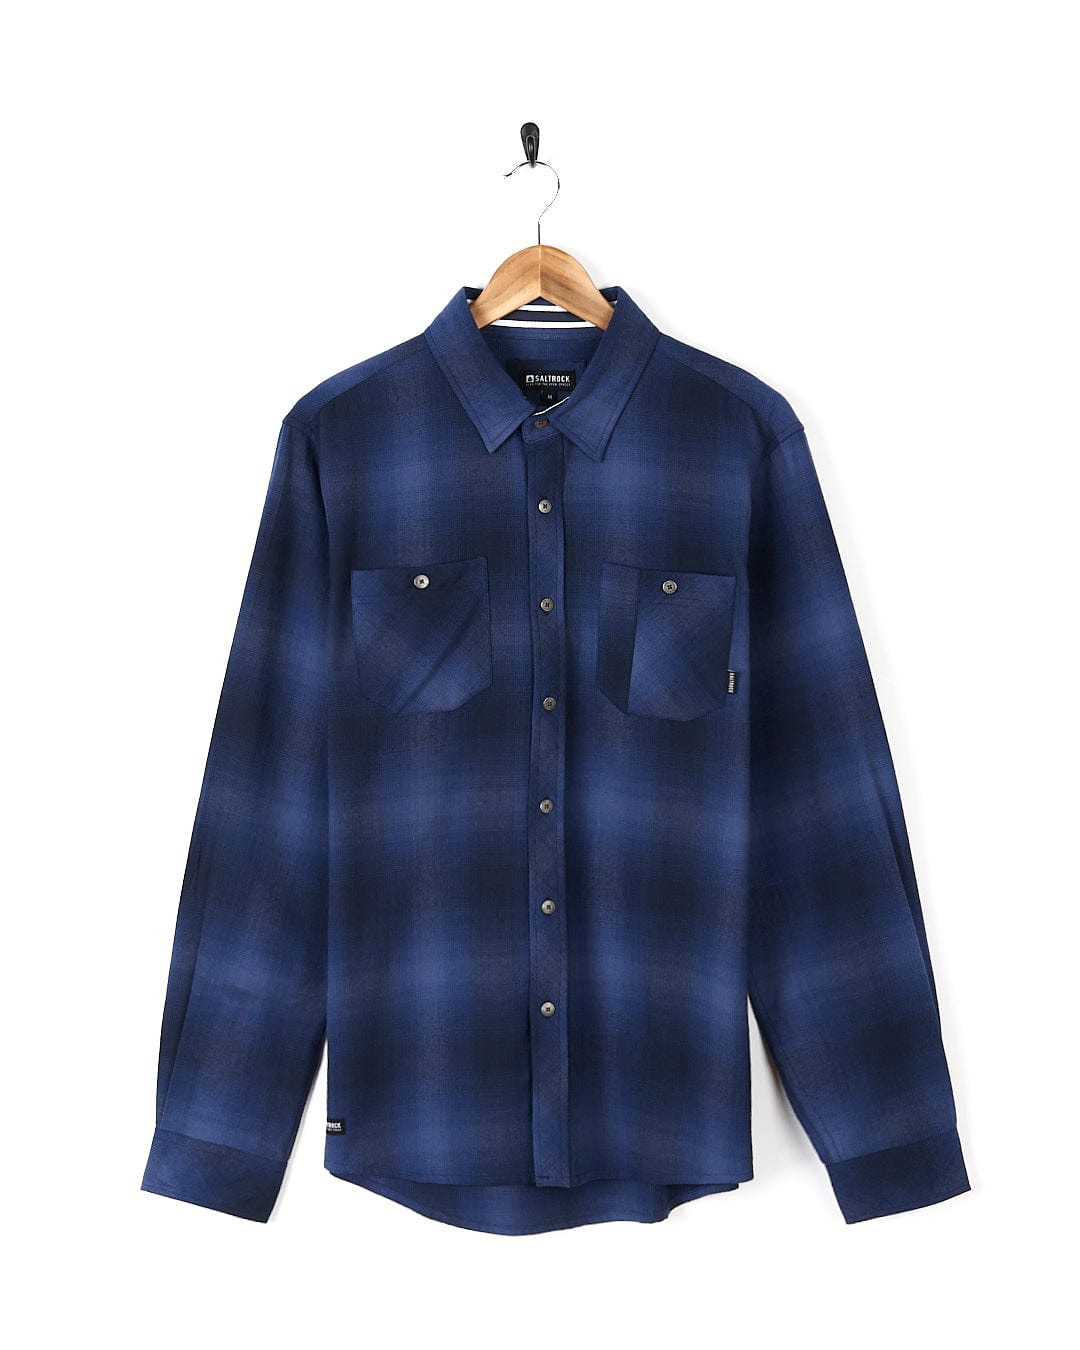 A Farris - Mens Check Shirt - Blue with Saltrock branding, made of 100% cotton, and featuring a blue check pattern, is delicately hanging on a hanger.